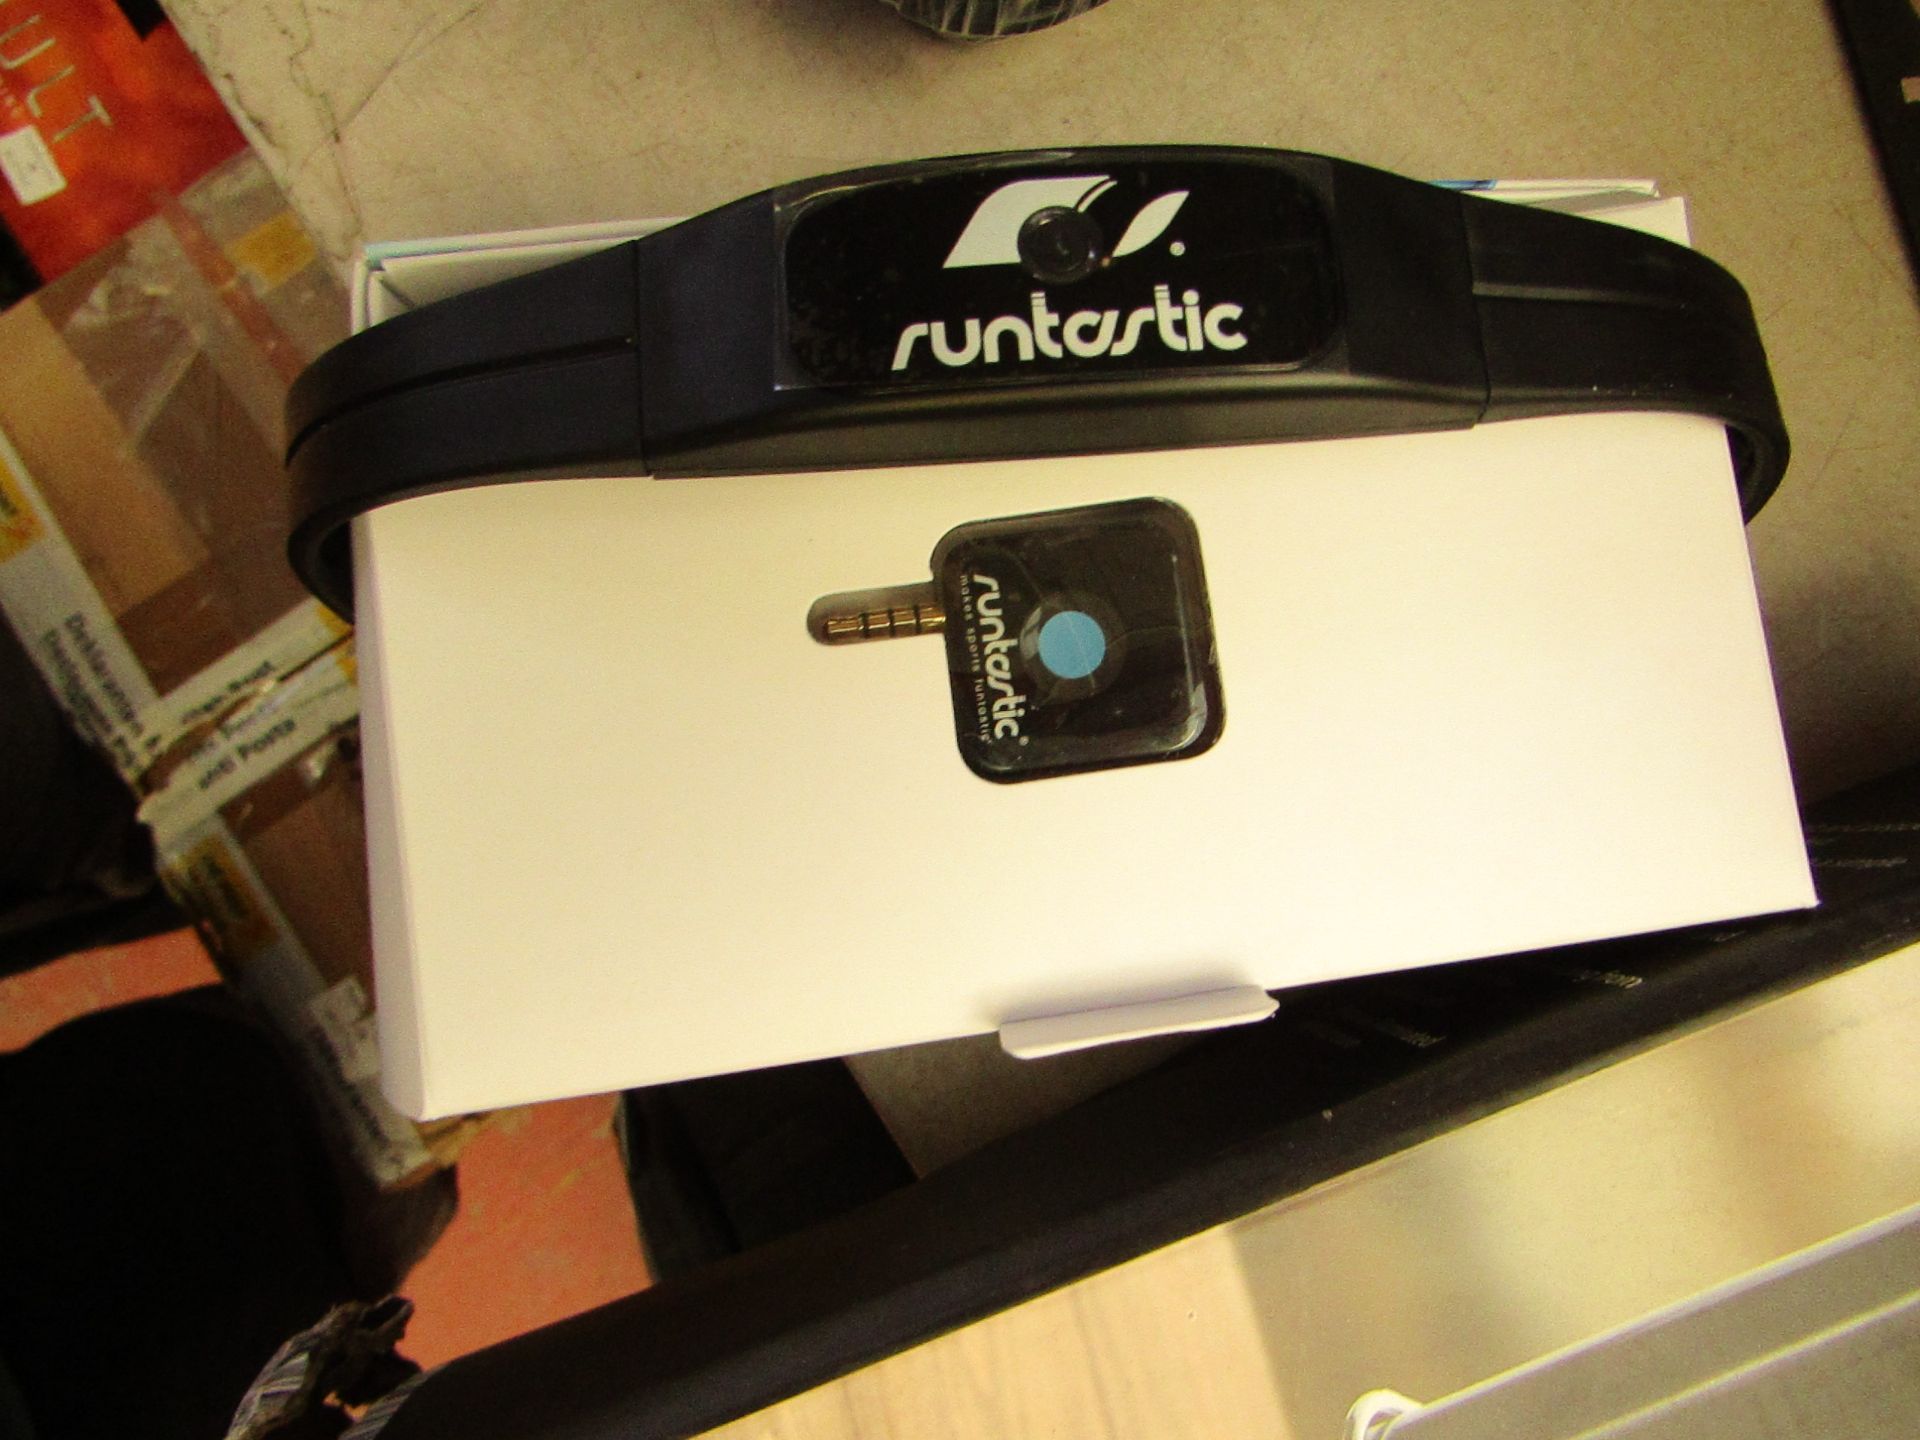 Runtastic heart rate monitor for smartphones, untested and boxed.